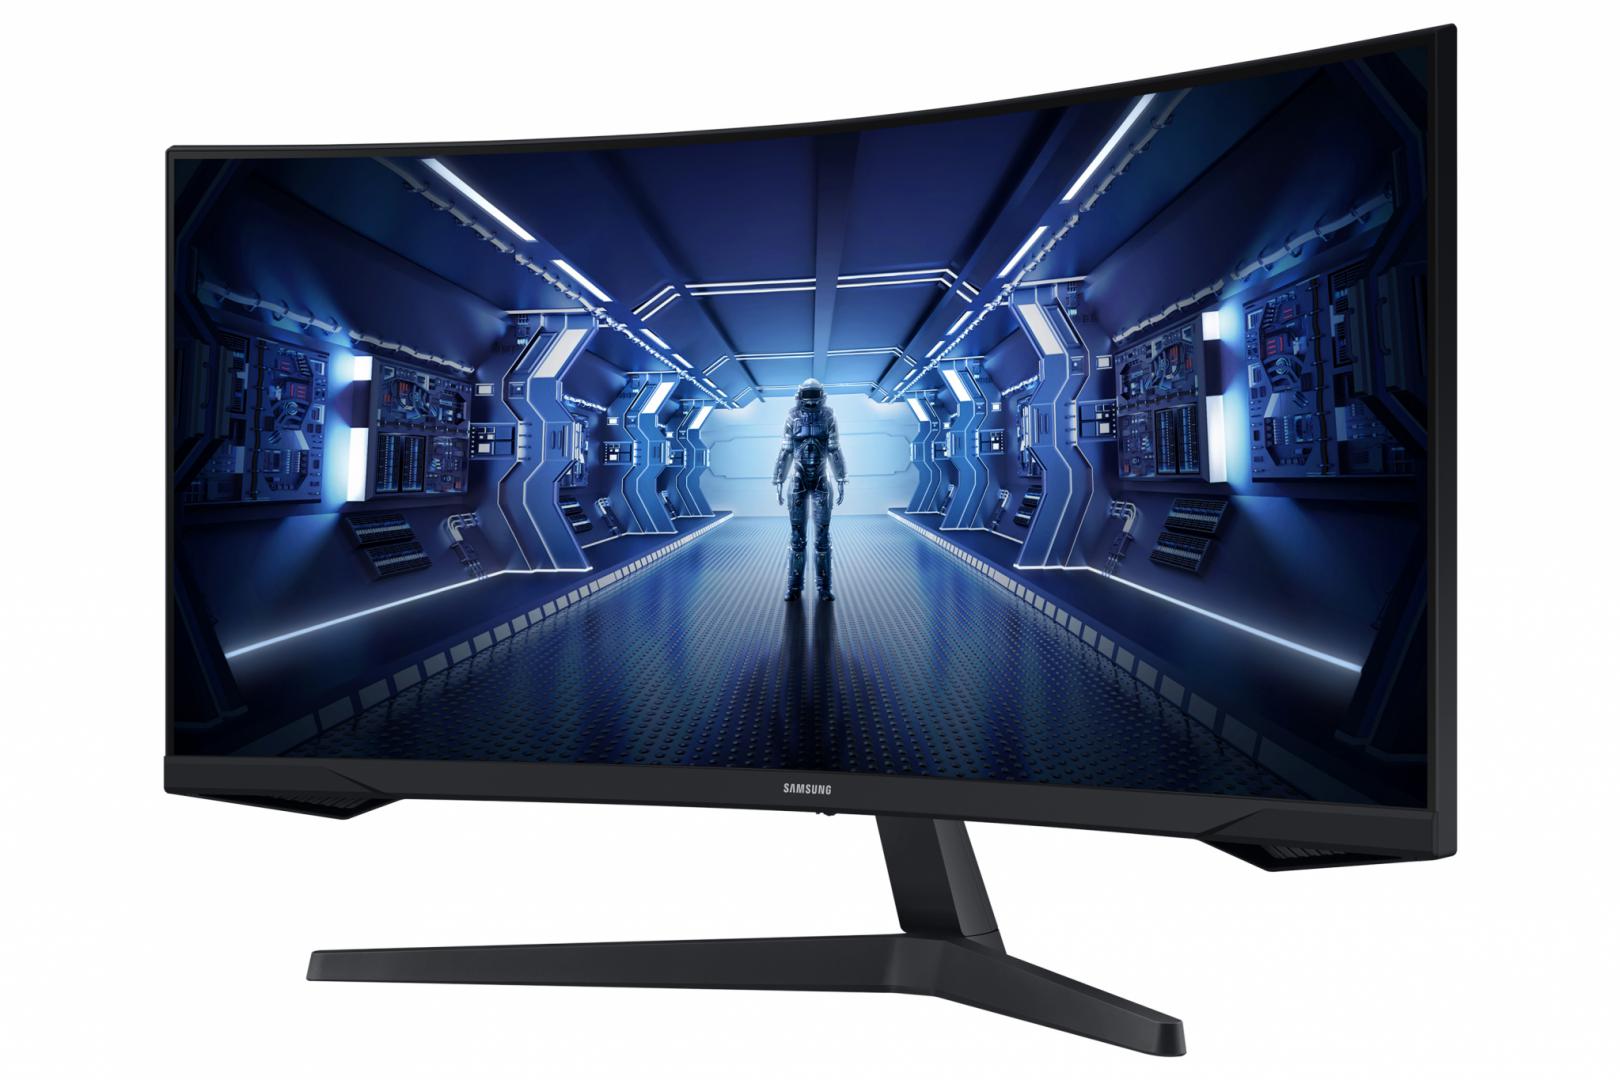 MONITOR SAMSUNG LC34G55TWWPXEN 34 inch, Curvature: 1000R, Panel Type:VA, Backlight: LED backlight, Resolution: 3440x1440, Aspect Ratio: 21:9 ,Refresh Rate:165Hz, Response time MPRT: 1 ms, Brightness: 250 cd/m²,Contrast (static): 2500:1, Contrast (dynamic): Mega ∞ DCR, Viewingangle: 178°/178°, Color